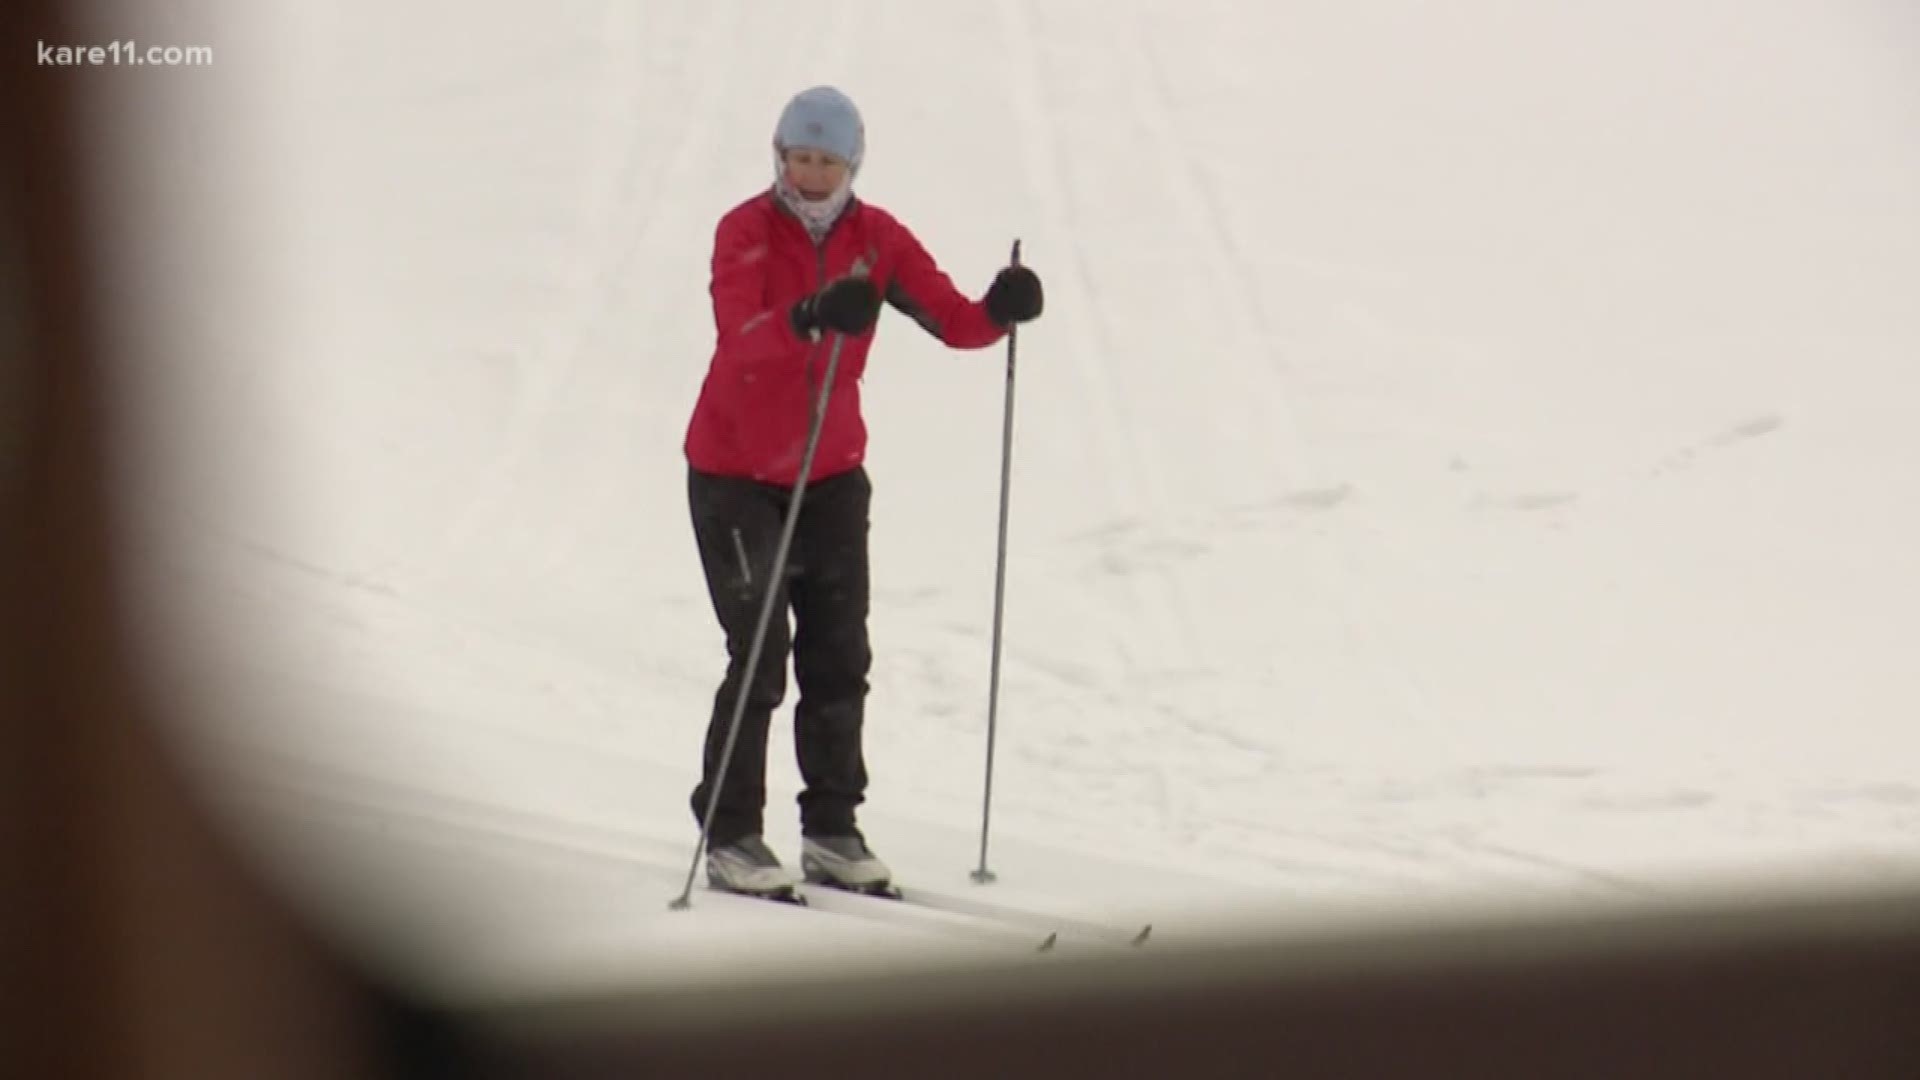 Skiers of all abilities and ages are welcome at the opener. https://kare11.tv/2Pm93Jm